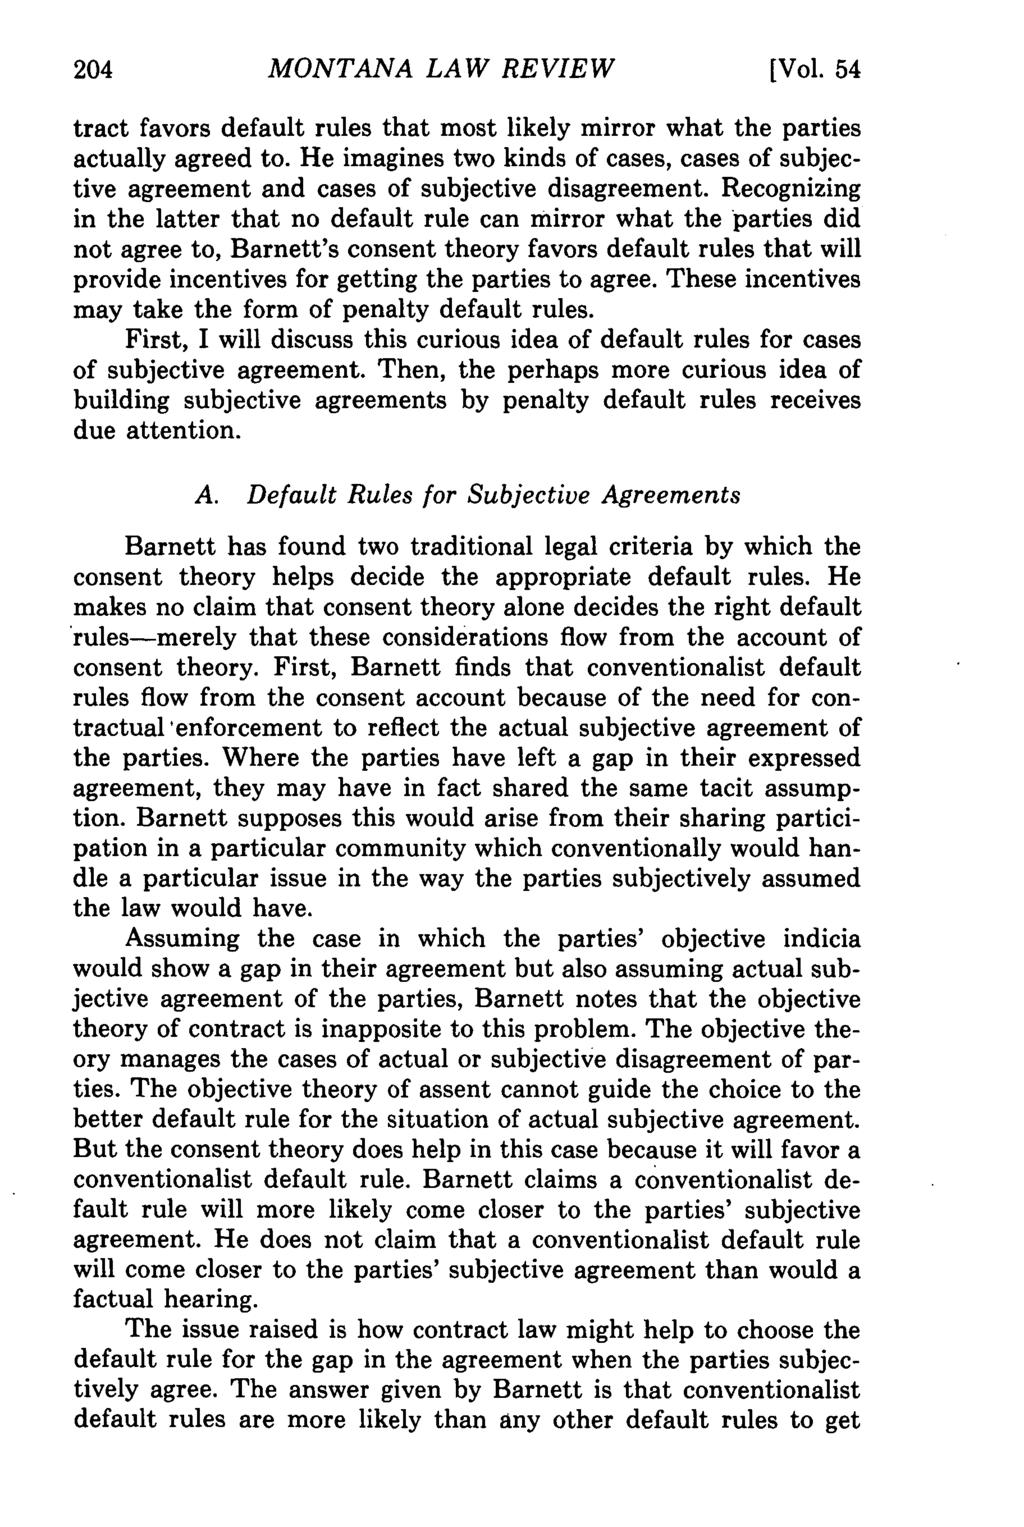 Montana Law Review, Vol. 54 [1993], Iss. 2, Art. 1 MONTANA LAW REVIEW [Vol. 54 tract favors default rules that most likely mirror what the parties actually agreed to.